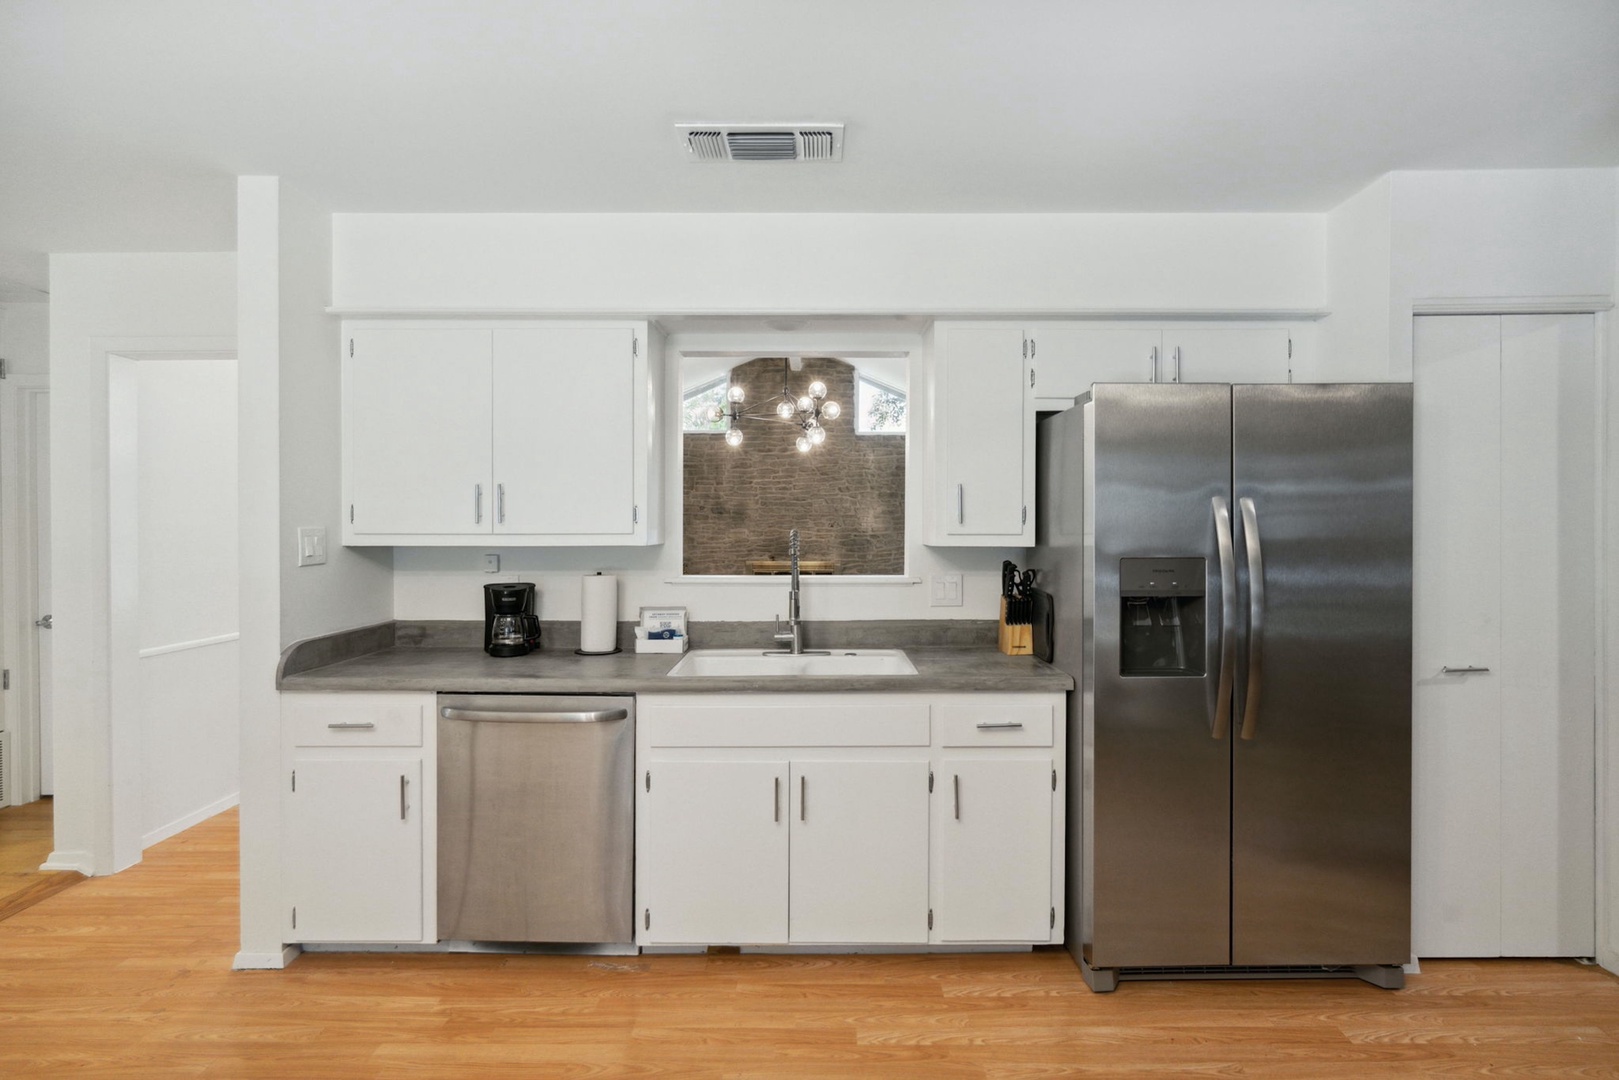 Fully equipped kitchen with additional seating